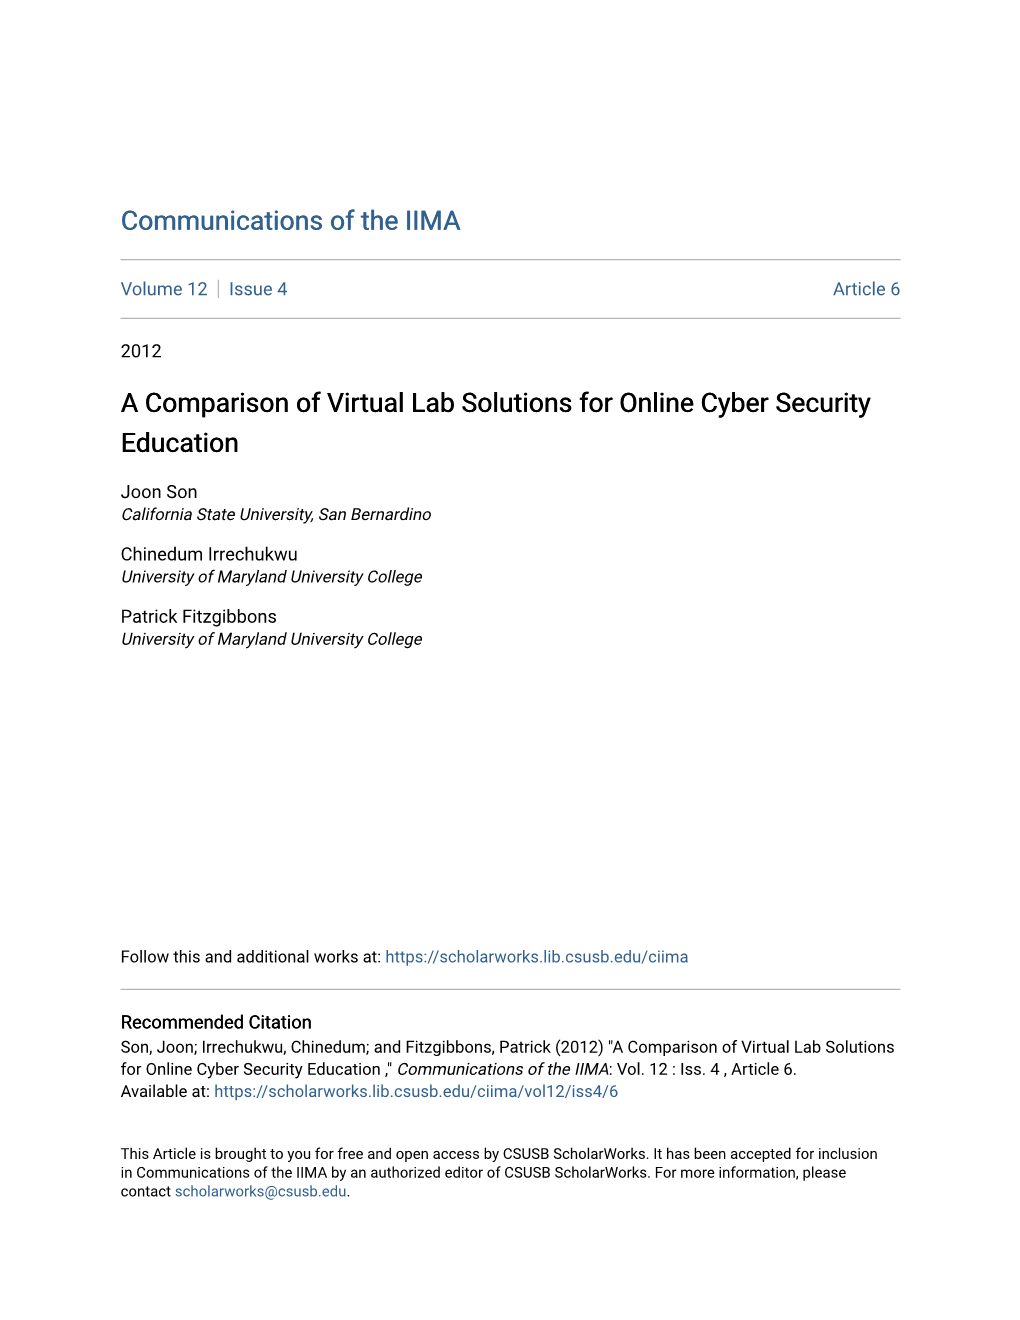 A Comparison of Virtual Lab Solutions for Online Cyber Security Education